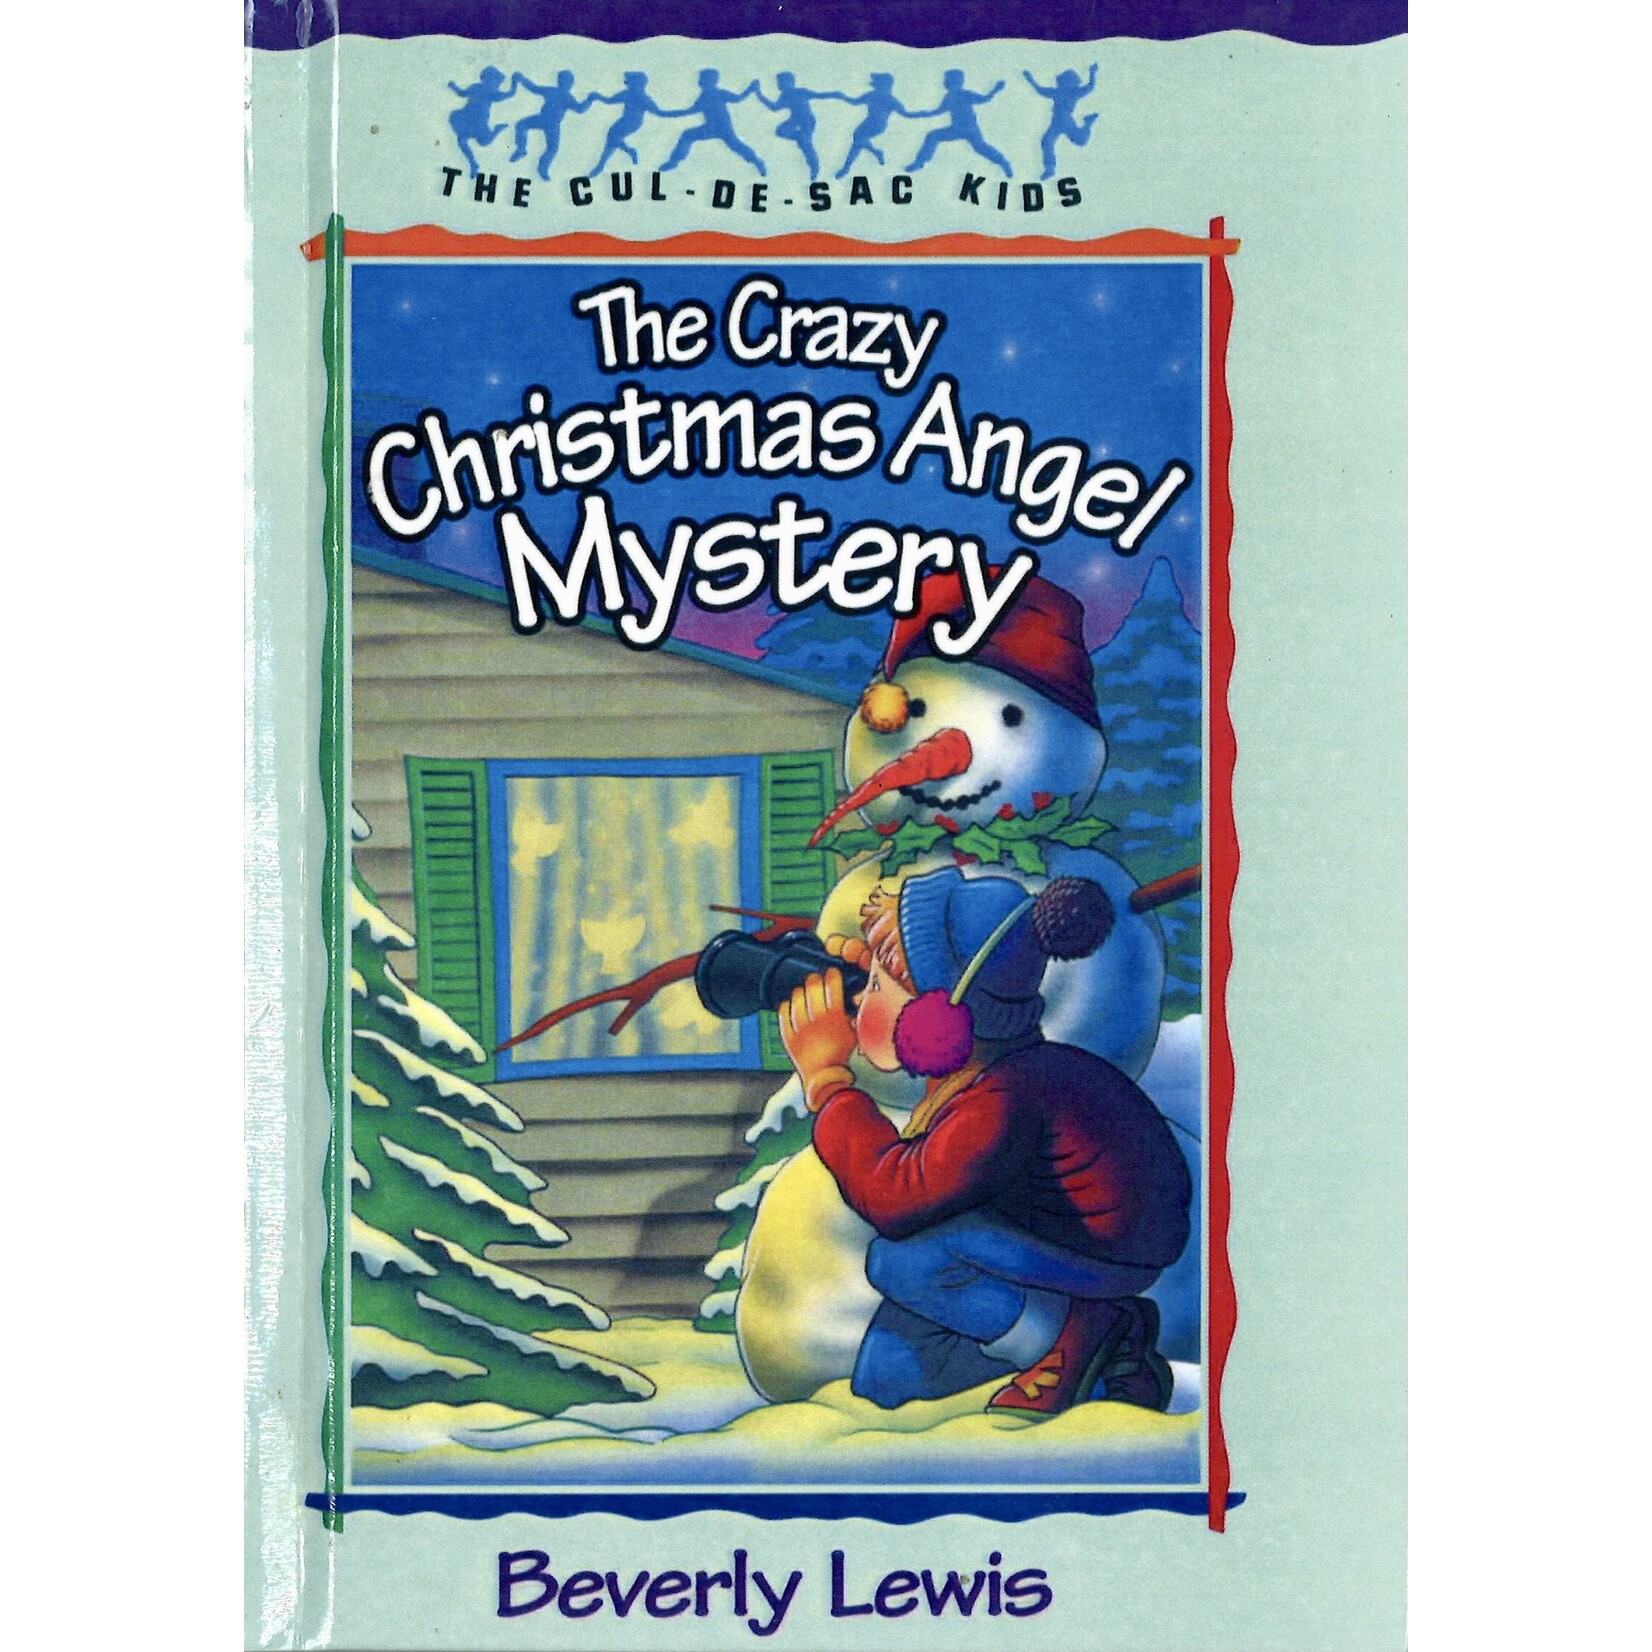 THE CRAZY CHRISTMAS ANGEL MYSTERY